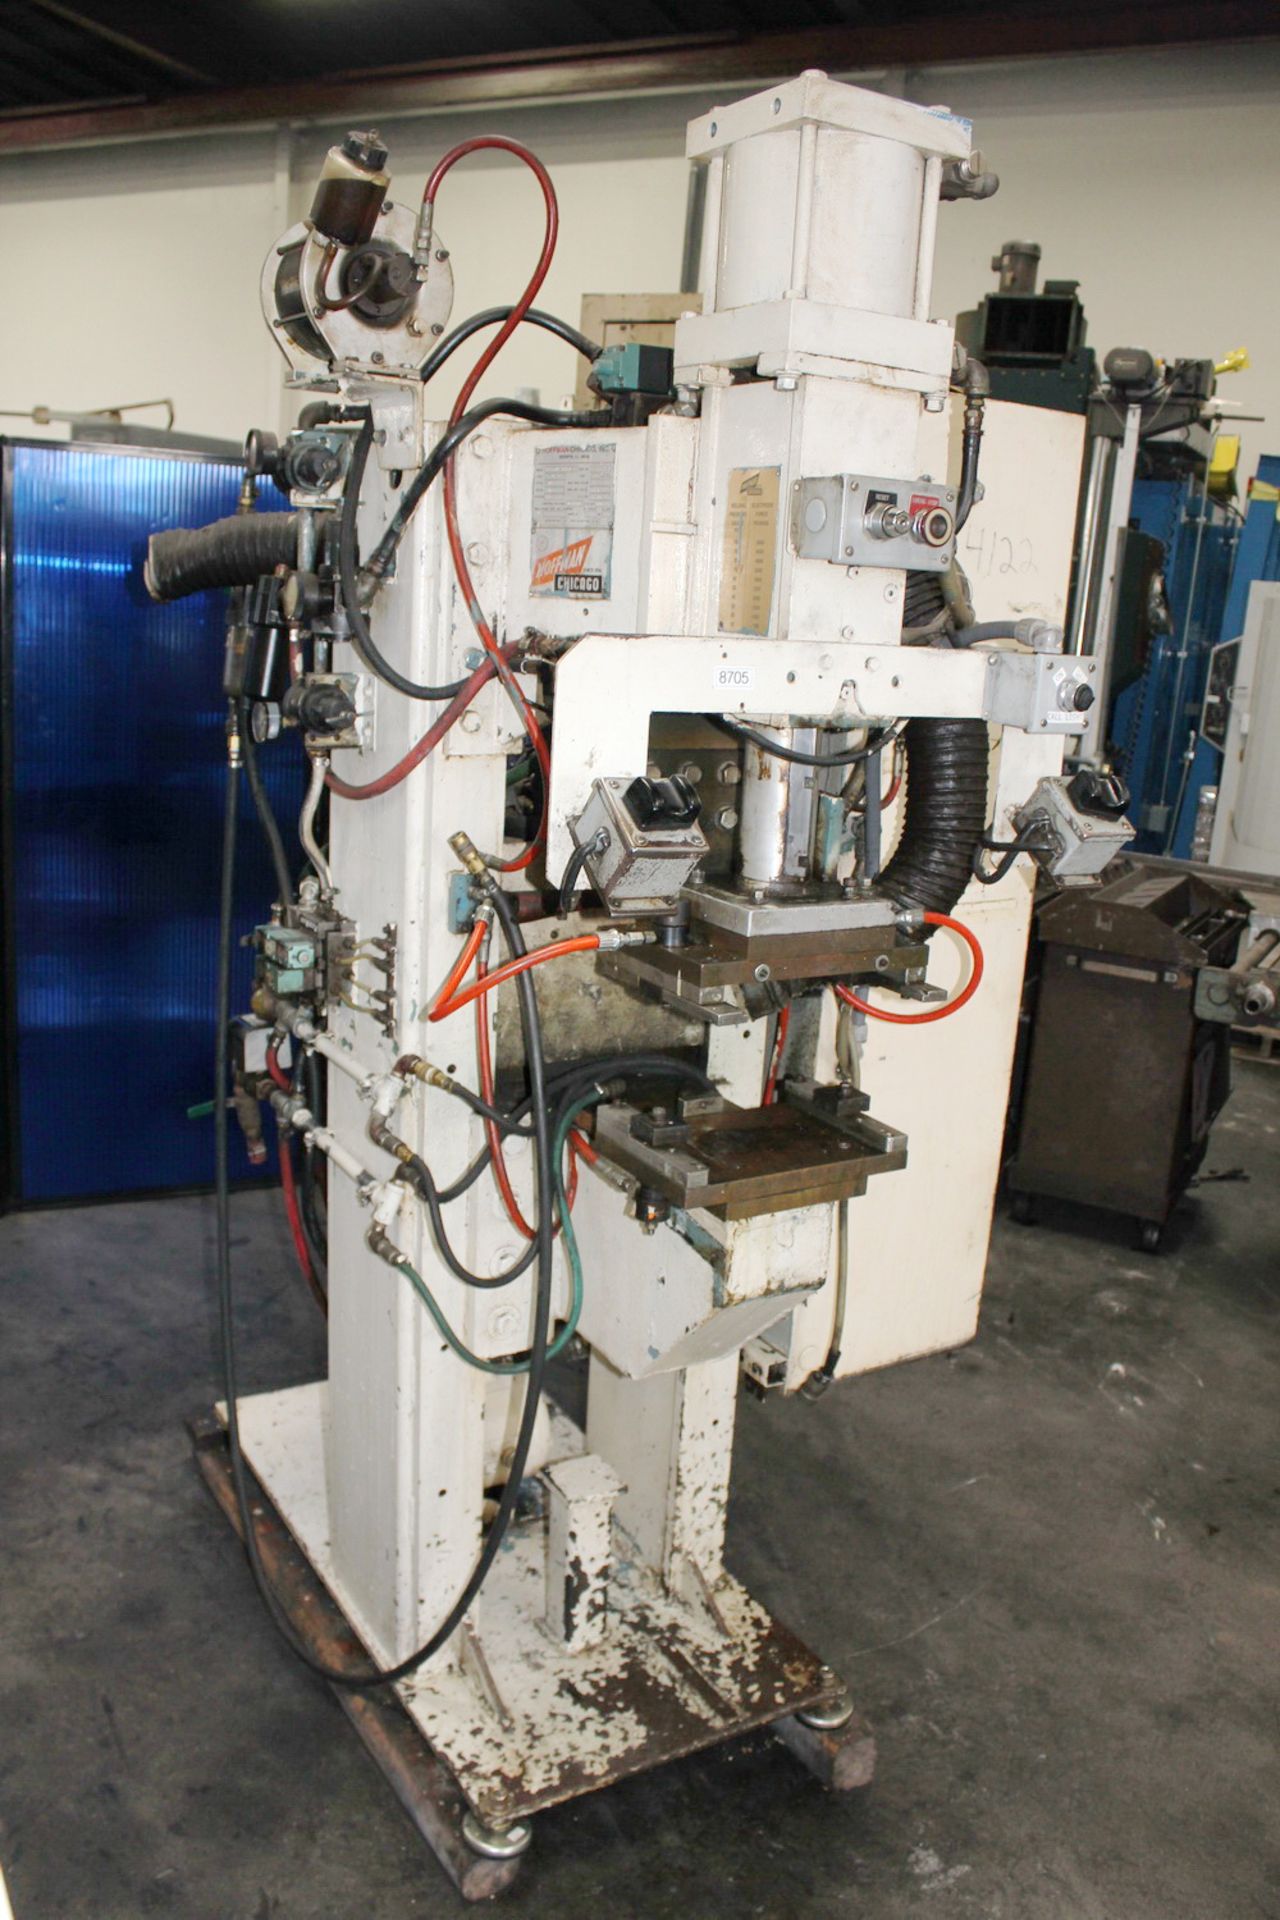 Hoffman Press Type Spot Welder 125 KVA x 14''. LOADING FEE FOR THIS LOT: $150